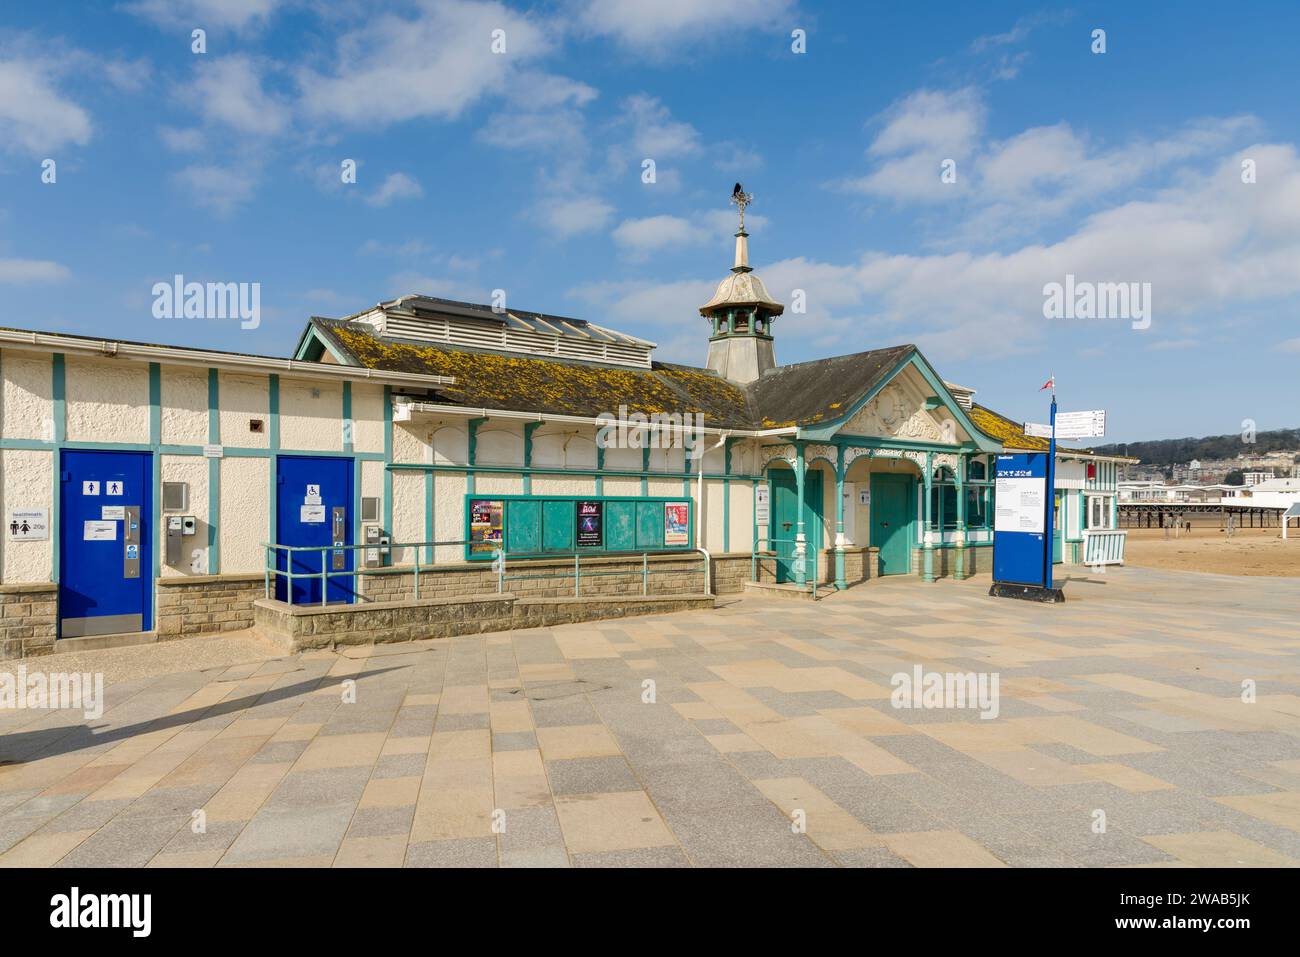 Public toilets on the seafront of the seaside town of Weston-super-Mare, North Somerset, England. Stock Photo